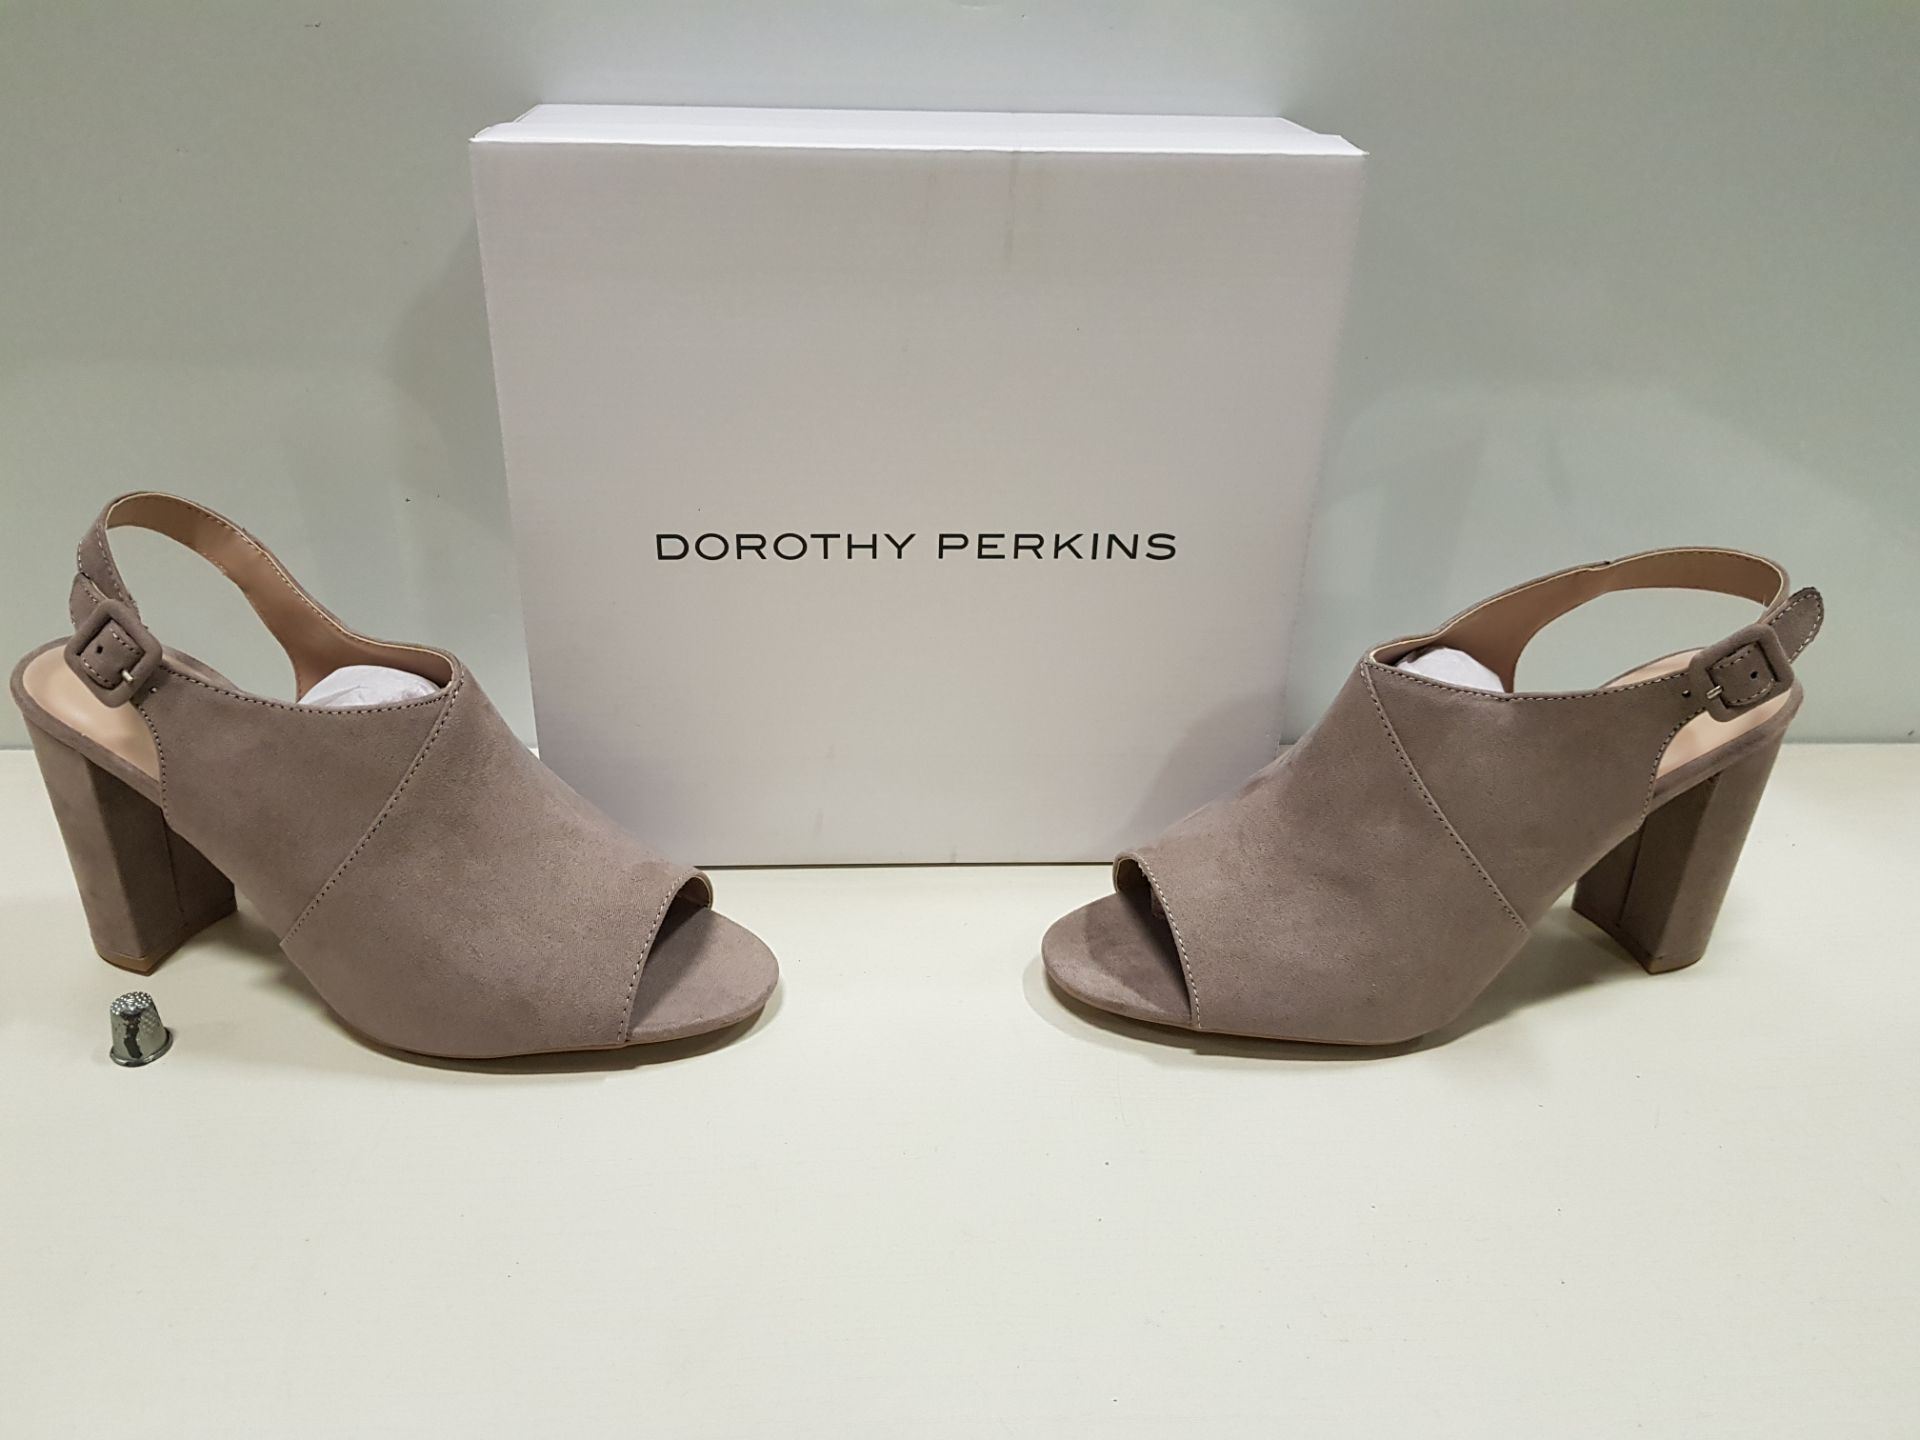 16 X PAIRS OF BRAND NEW DOROTHY PERKINS TAUPE SAVO HEELED SANDAL SHOES RRP £28 PP TOTAL £448 - UK